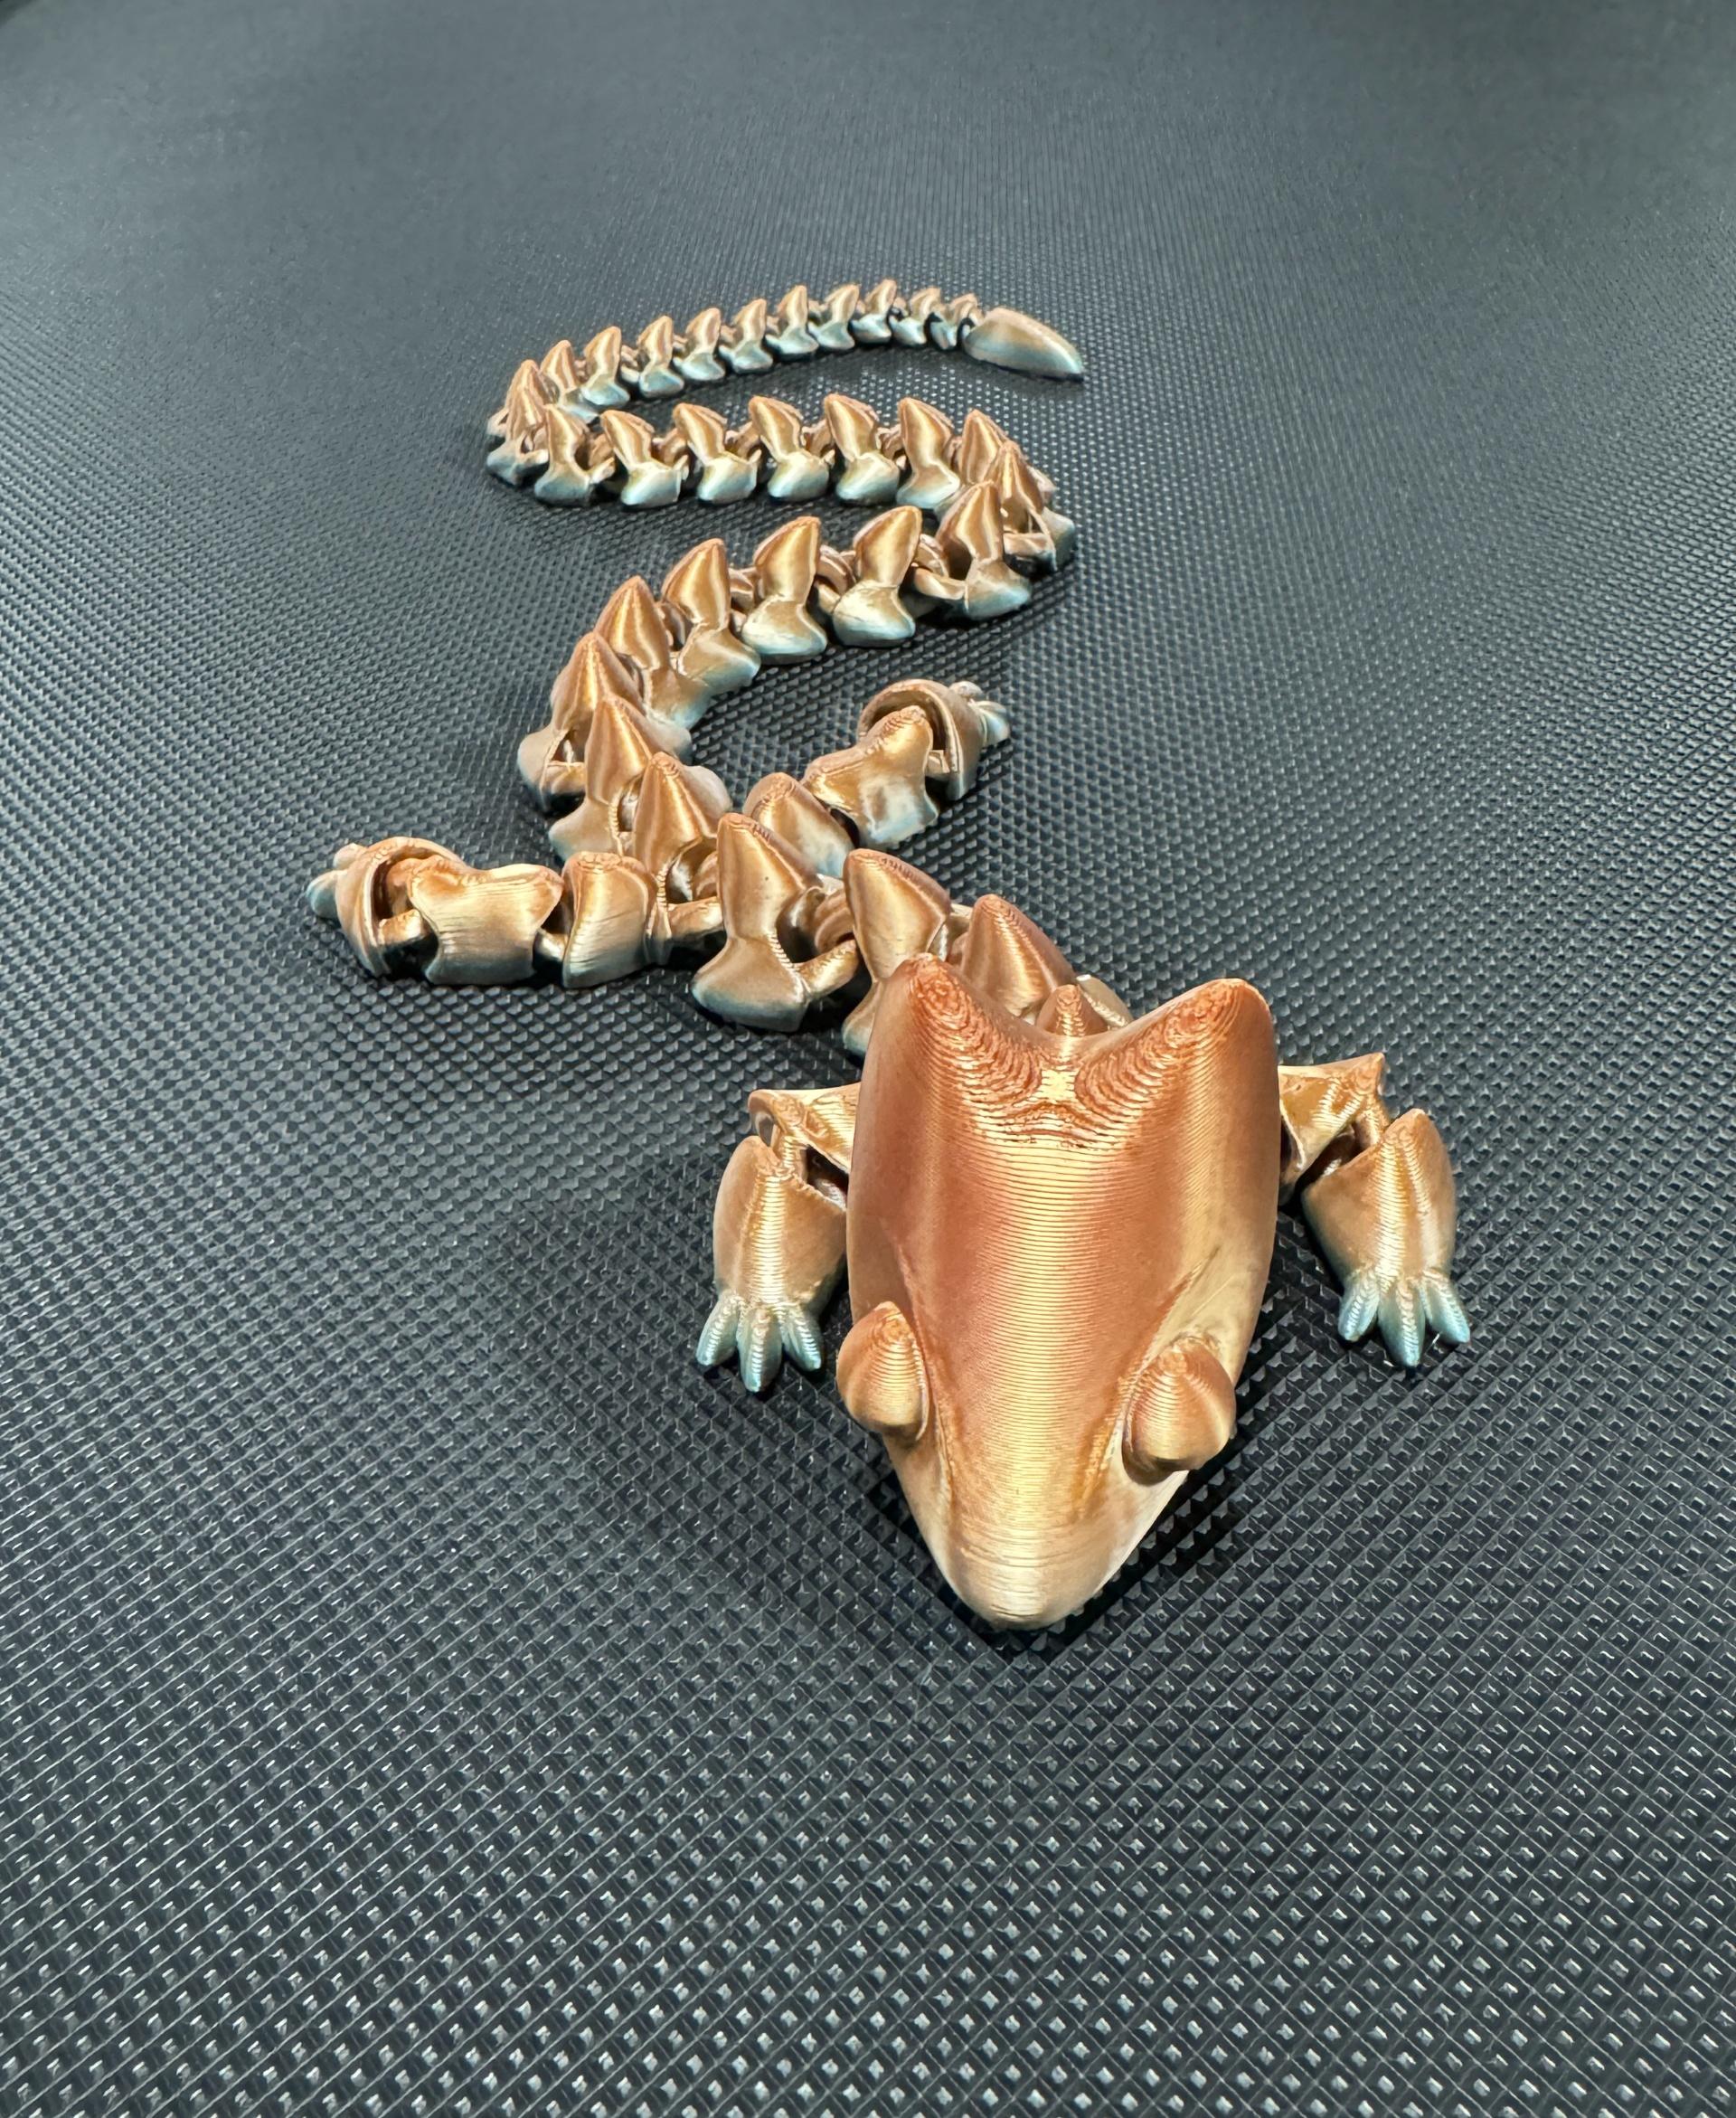 Articulated Dragon 001 - Print in place - No supports - STL - TTYT3D PLA printed at 75% scale - 3d model